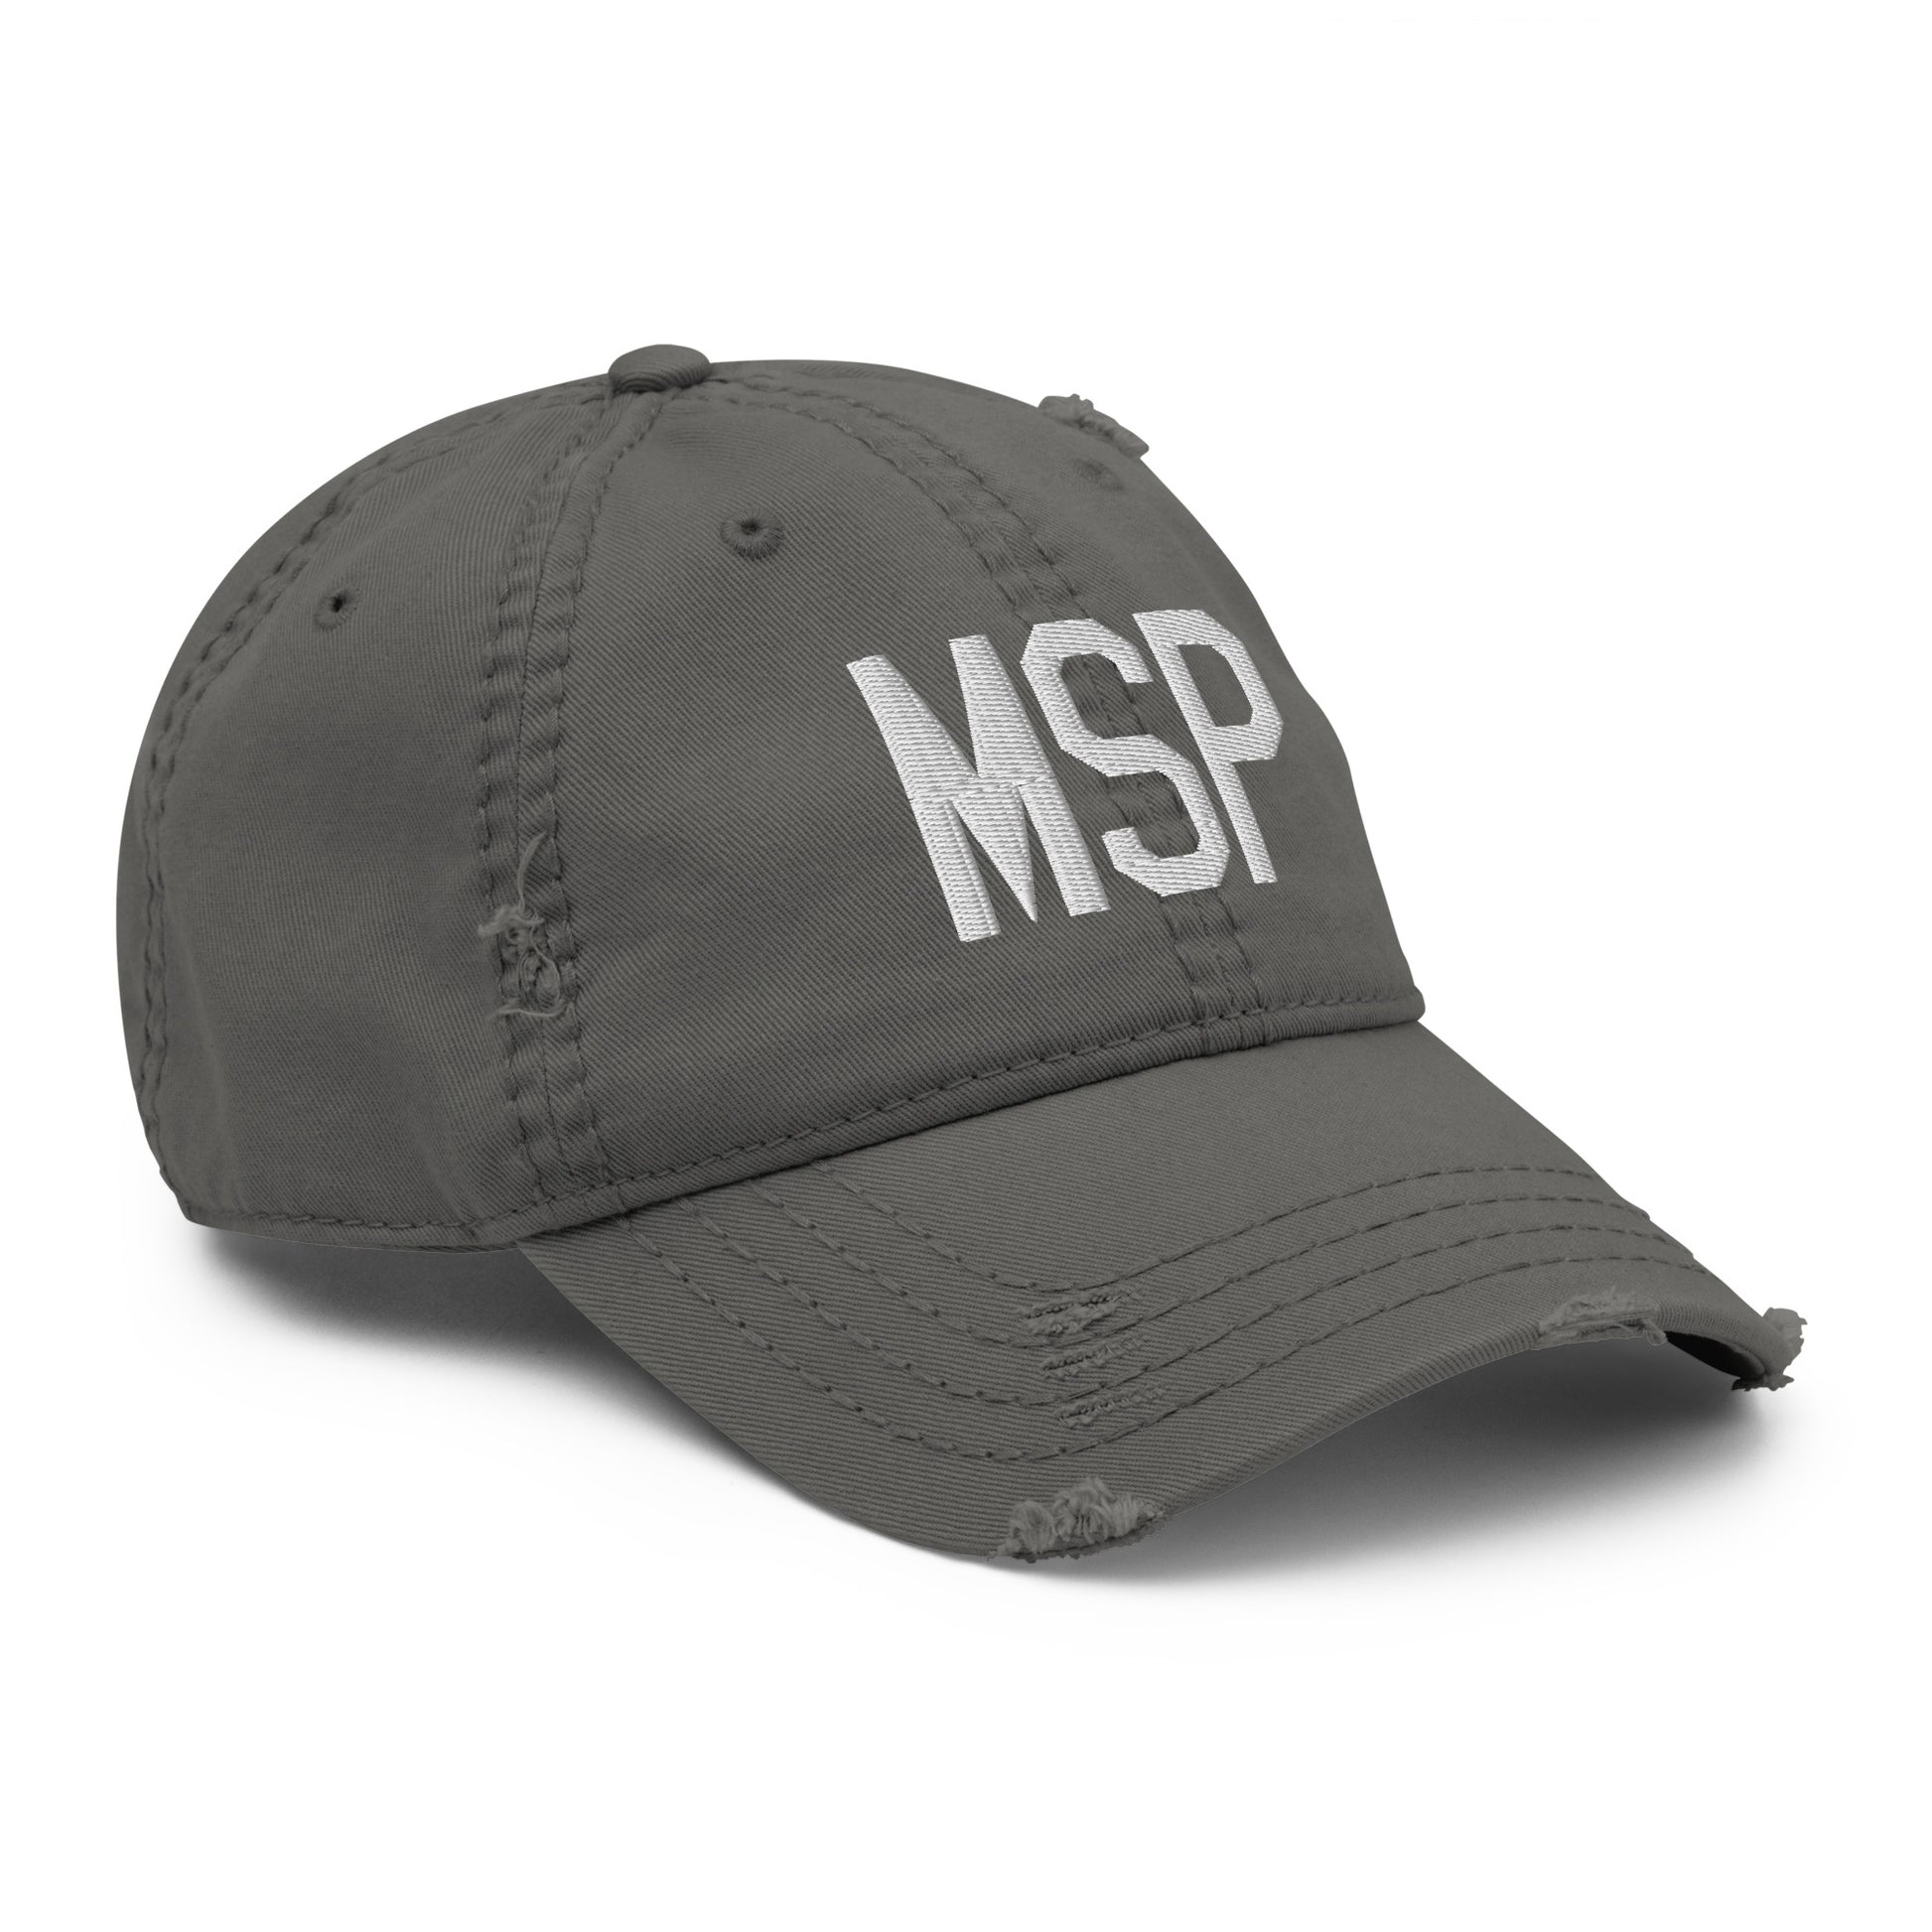 Airport Code Distressed Hat - White • MSP Minneapolis • YHM Designs - Image 17